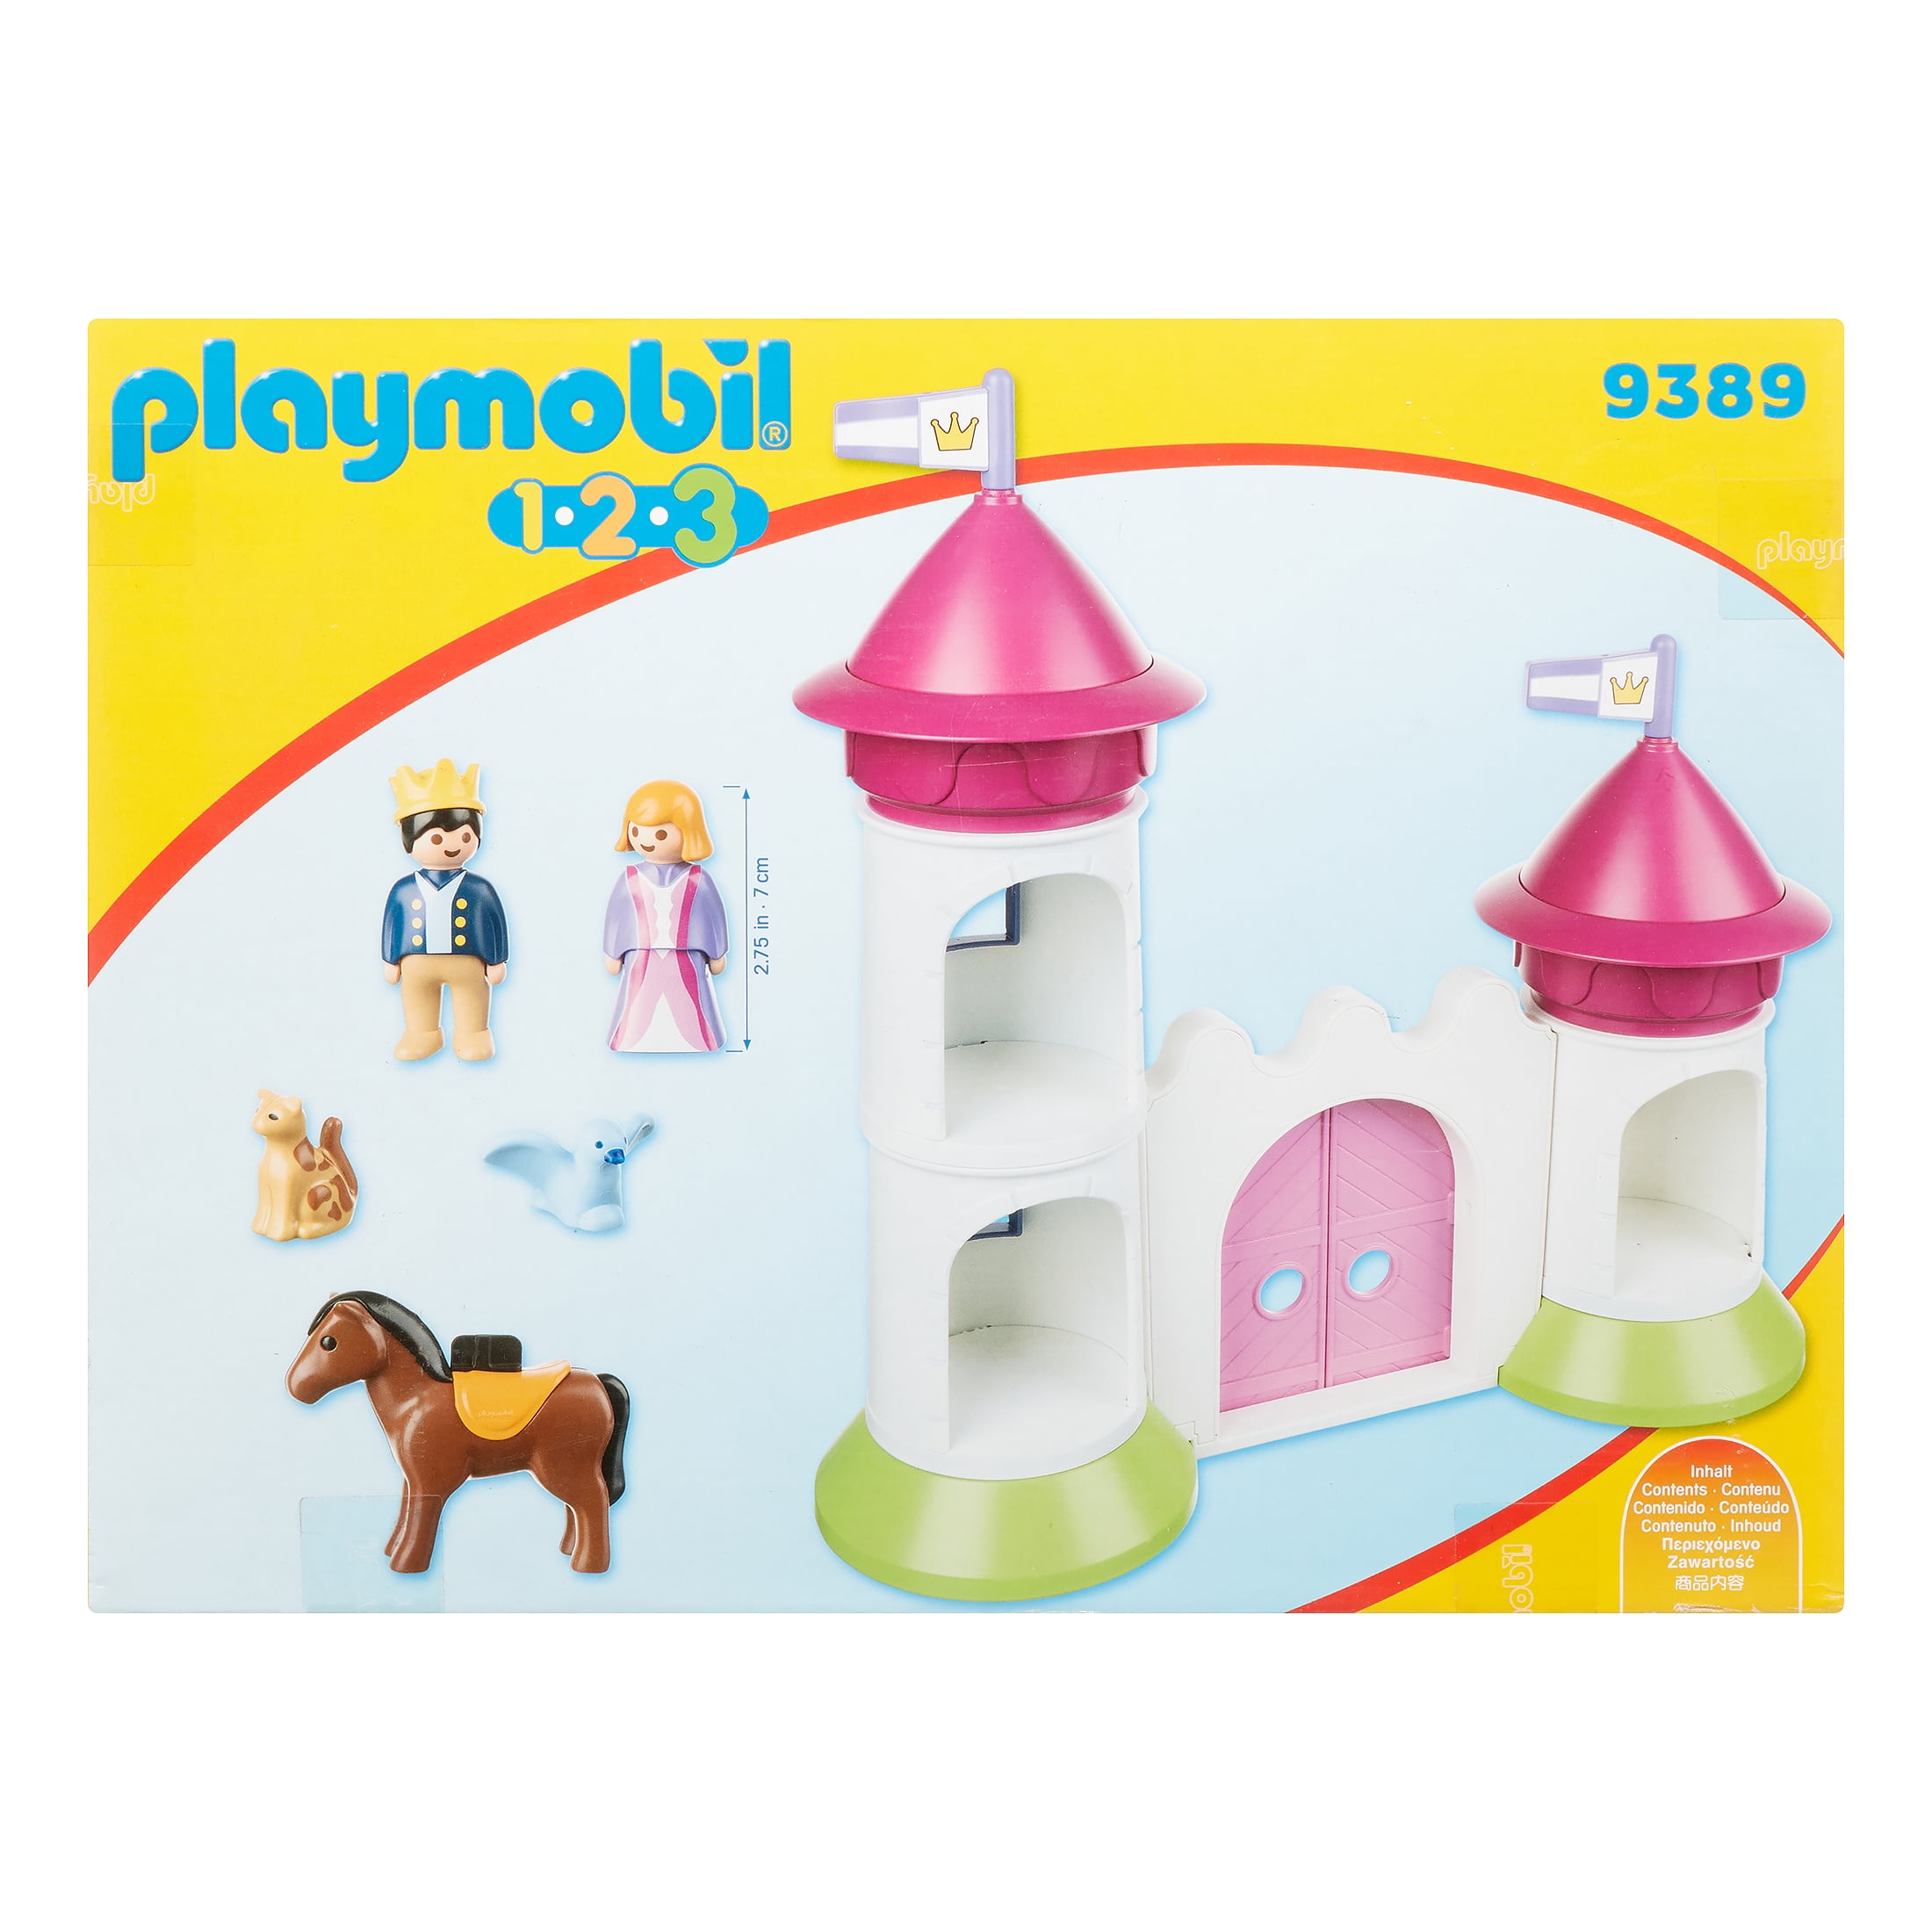 Playmobil Castle with Stackable Towers, Multicolored